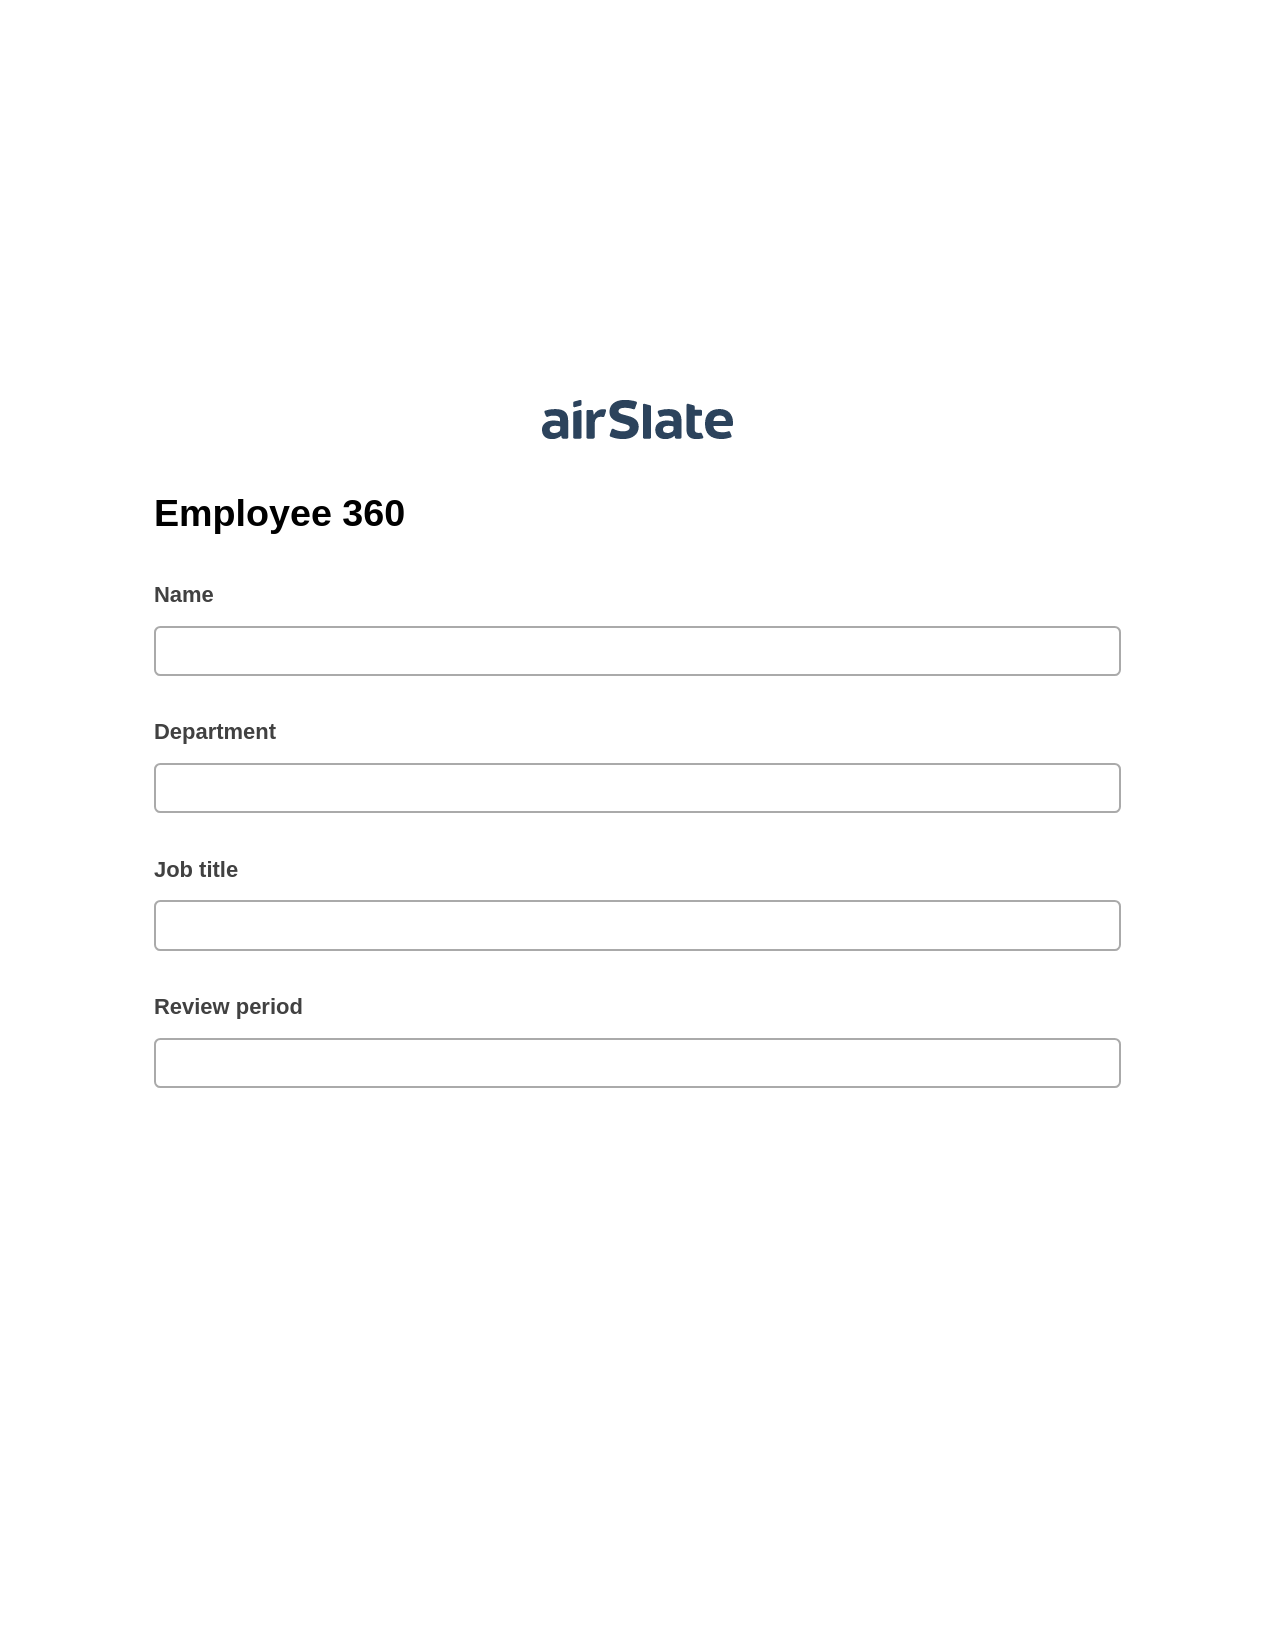 Employee 360 Pre-fill from Salesforce Records with SOQL Bot, SendGrid send Campaign bot, Export to Smartsheet